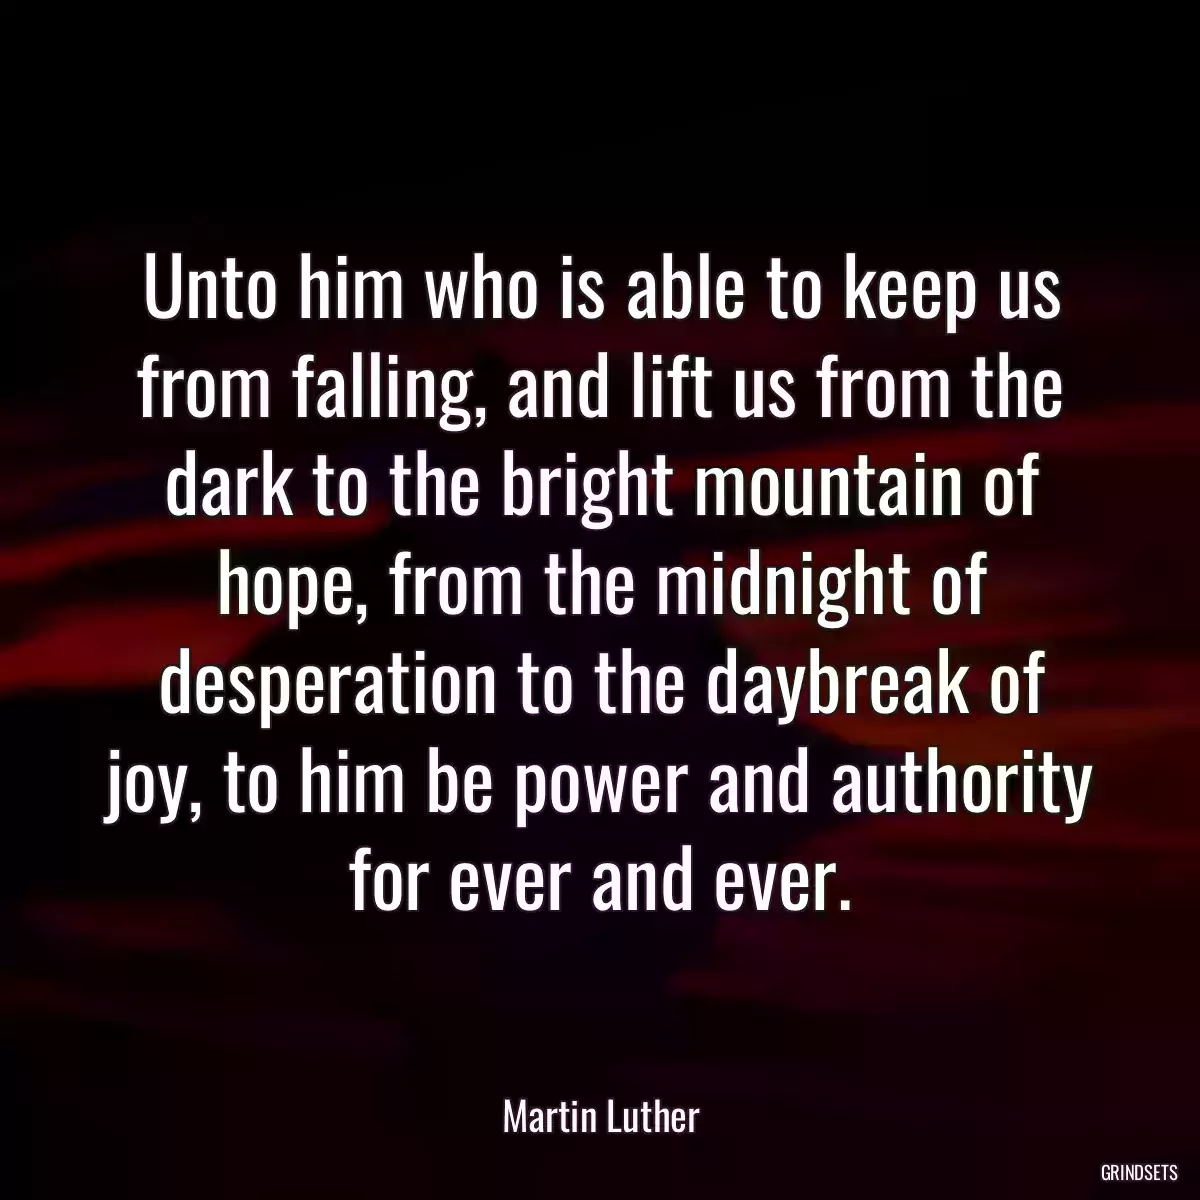 Unto him who is able to keep us from falling, and lift us from the dark to the bright mountain of hope, from the midnight of desperation to the daybreak of joy, to him be power and authority for ever and ever.